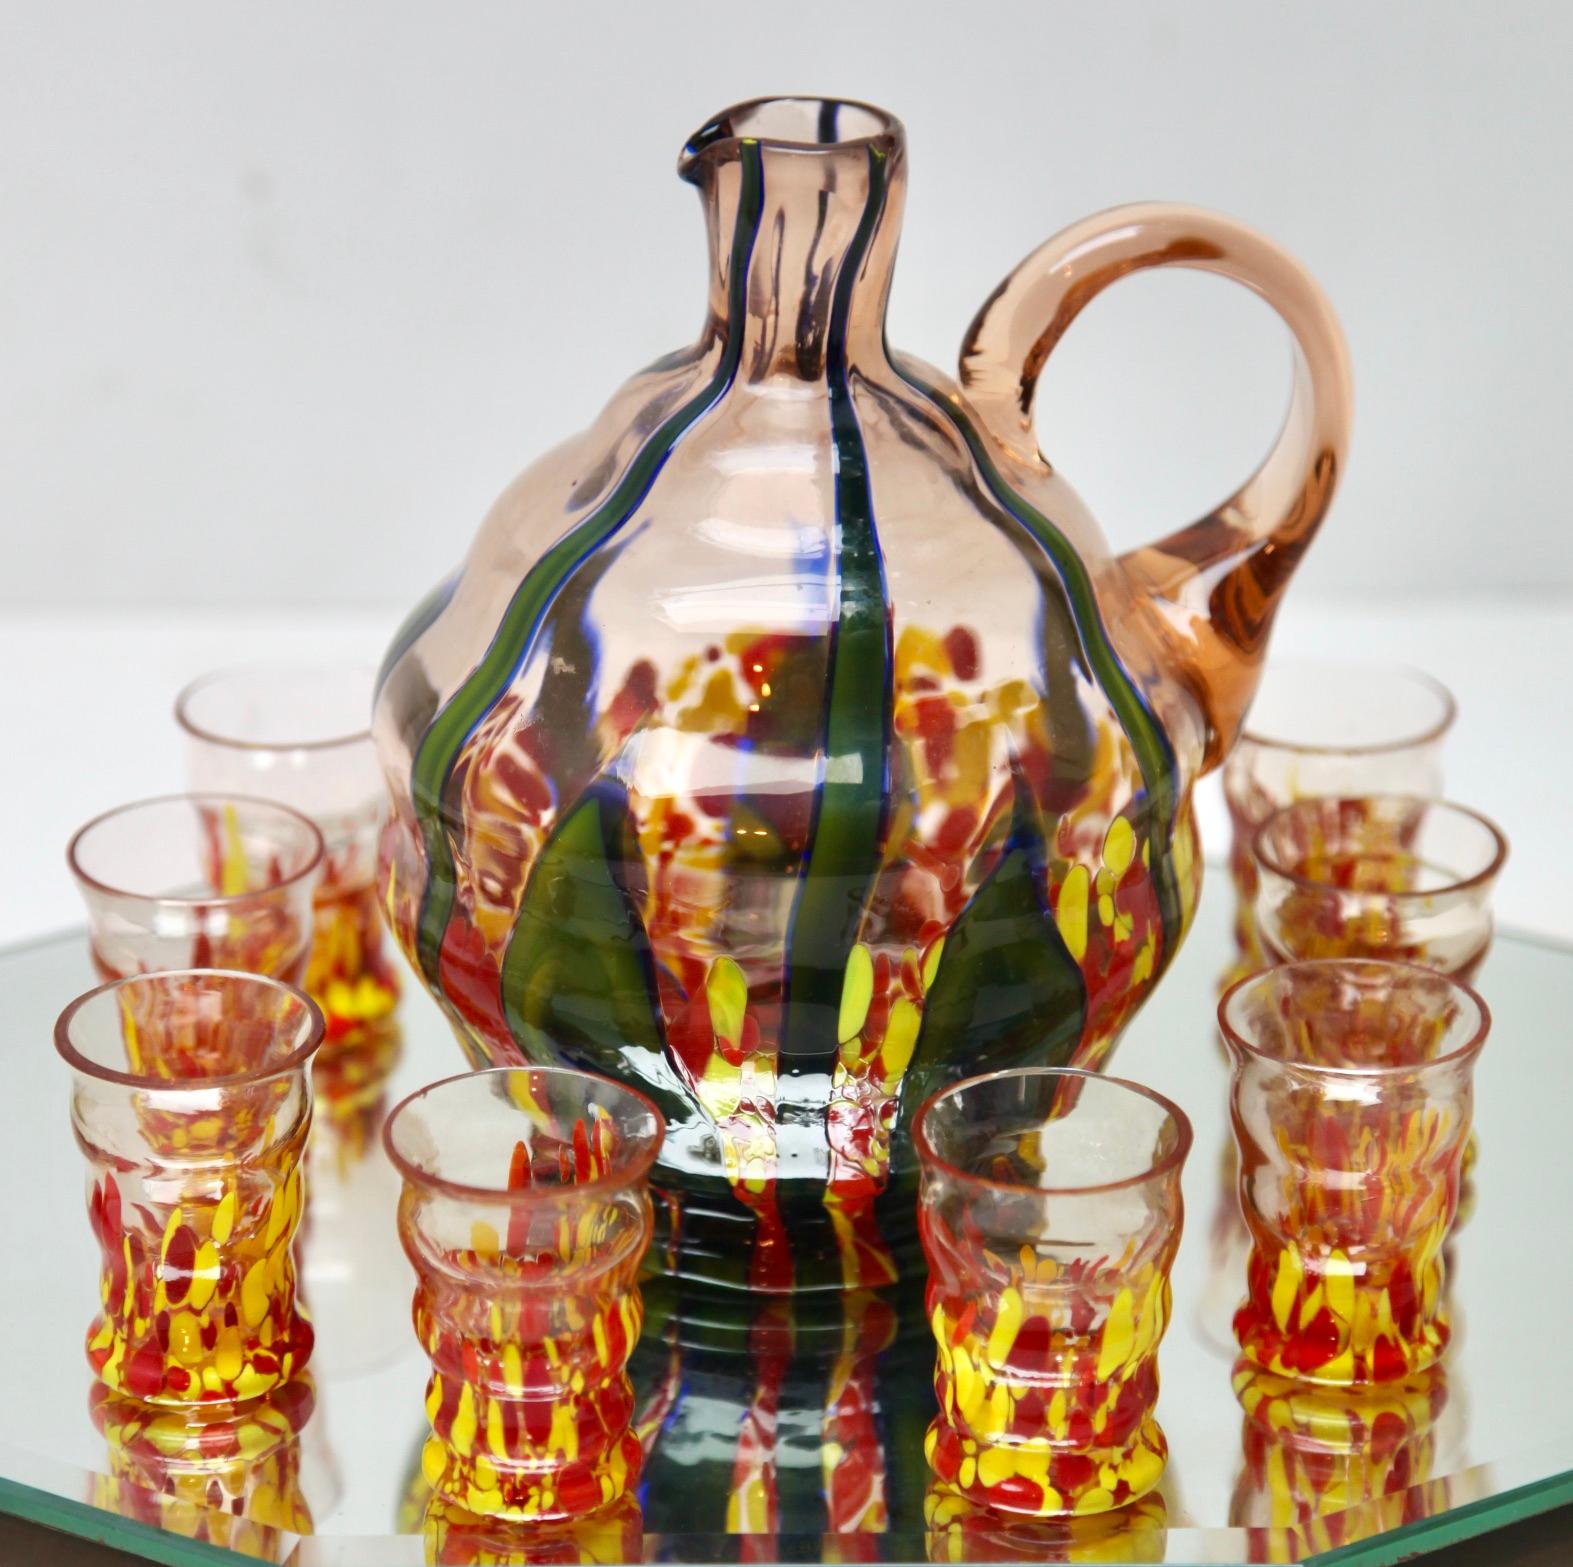 Murano liqueur set 8 shot glasses and decanter, with serving tray, circa 1938
Art Glass Murano Italie
Colored decoration.
Set with a decanter and 8 matching glasses and a serving tray.

Dimensions: decanter
height 17 cm 6.69 inch
width 12 cm